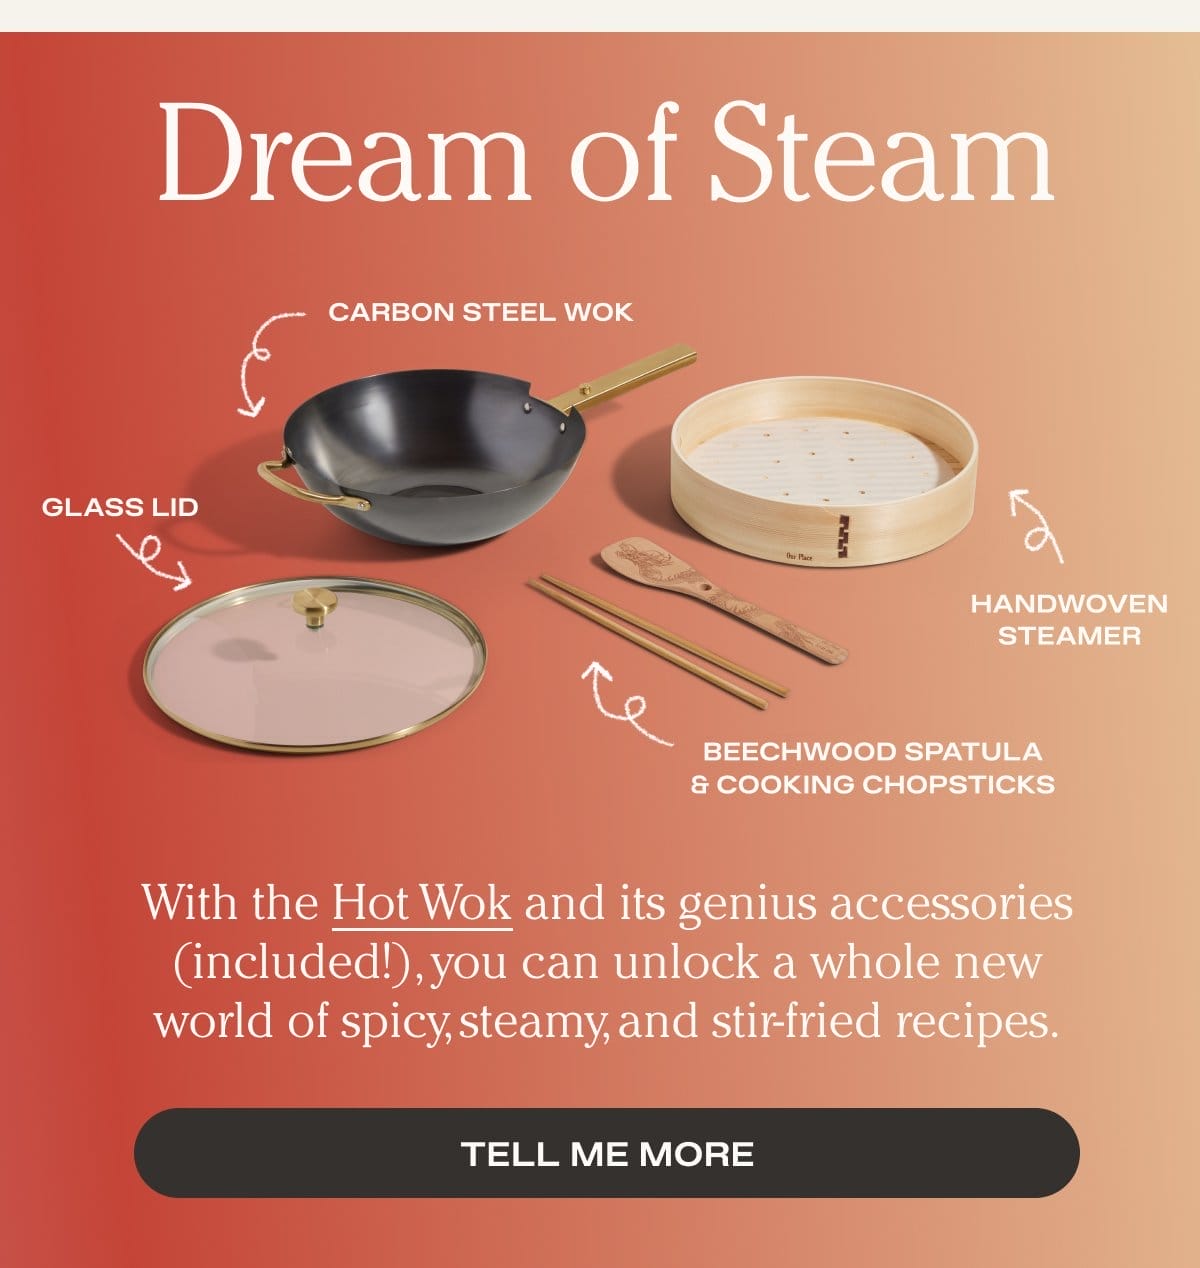 Dream of Steam - With the Hot Wok and its genius accessories (included!), you can unlock a whole new world of spicy, steamy, and stir-fried recipes. - Tell Me More